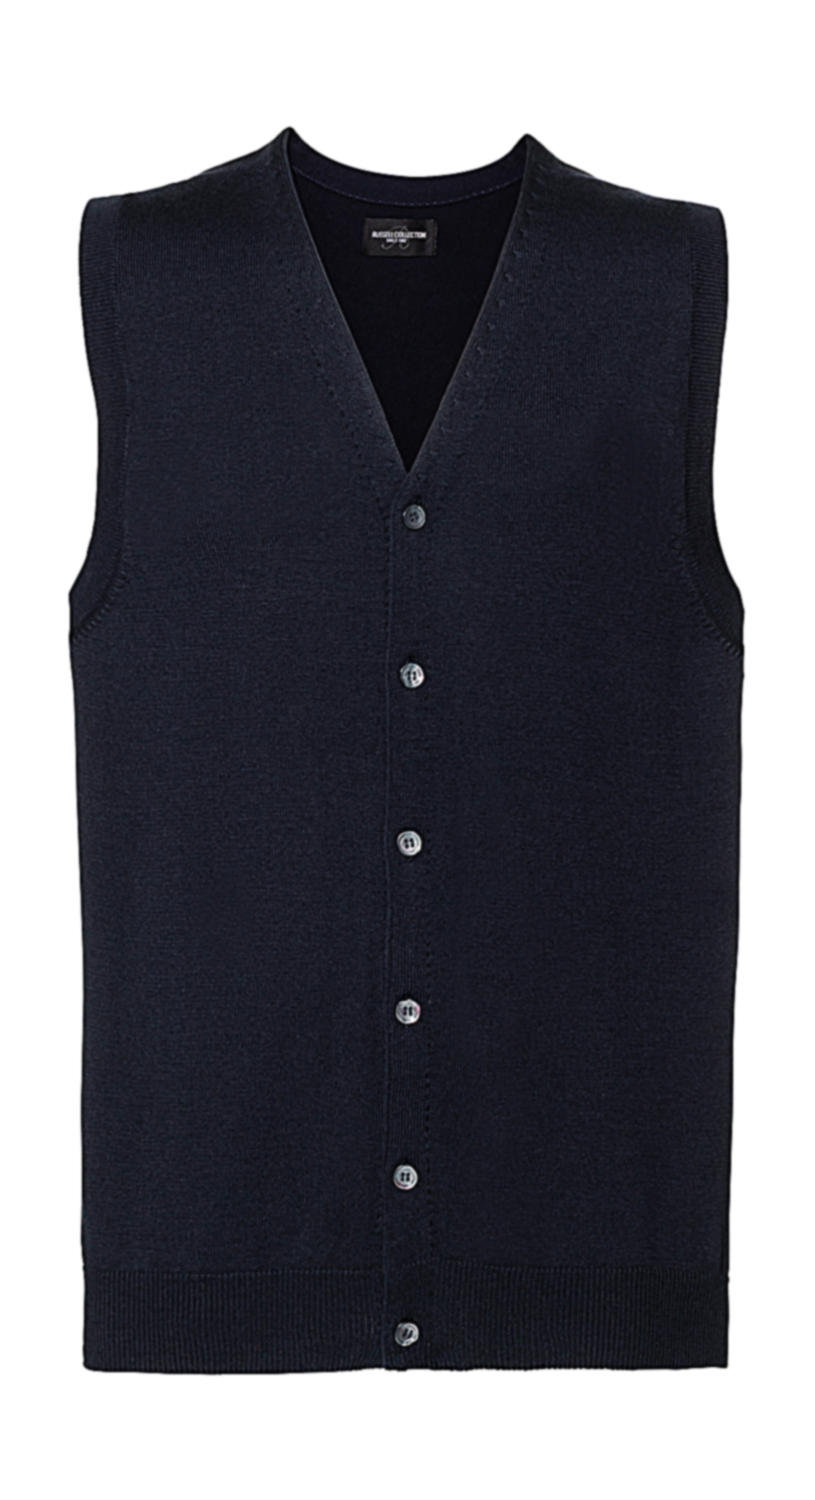  Mens V-Neck Sleeveless Knitted Cardigan in Farbe French Navy